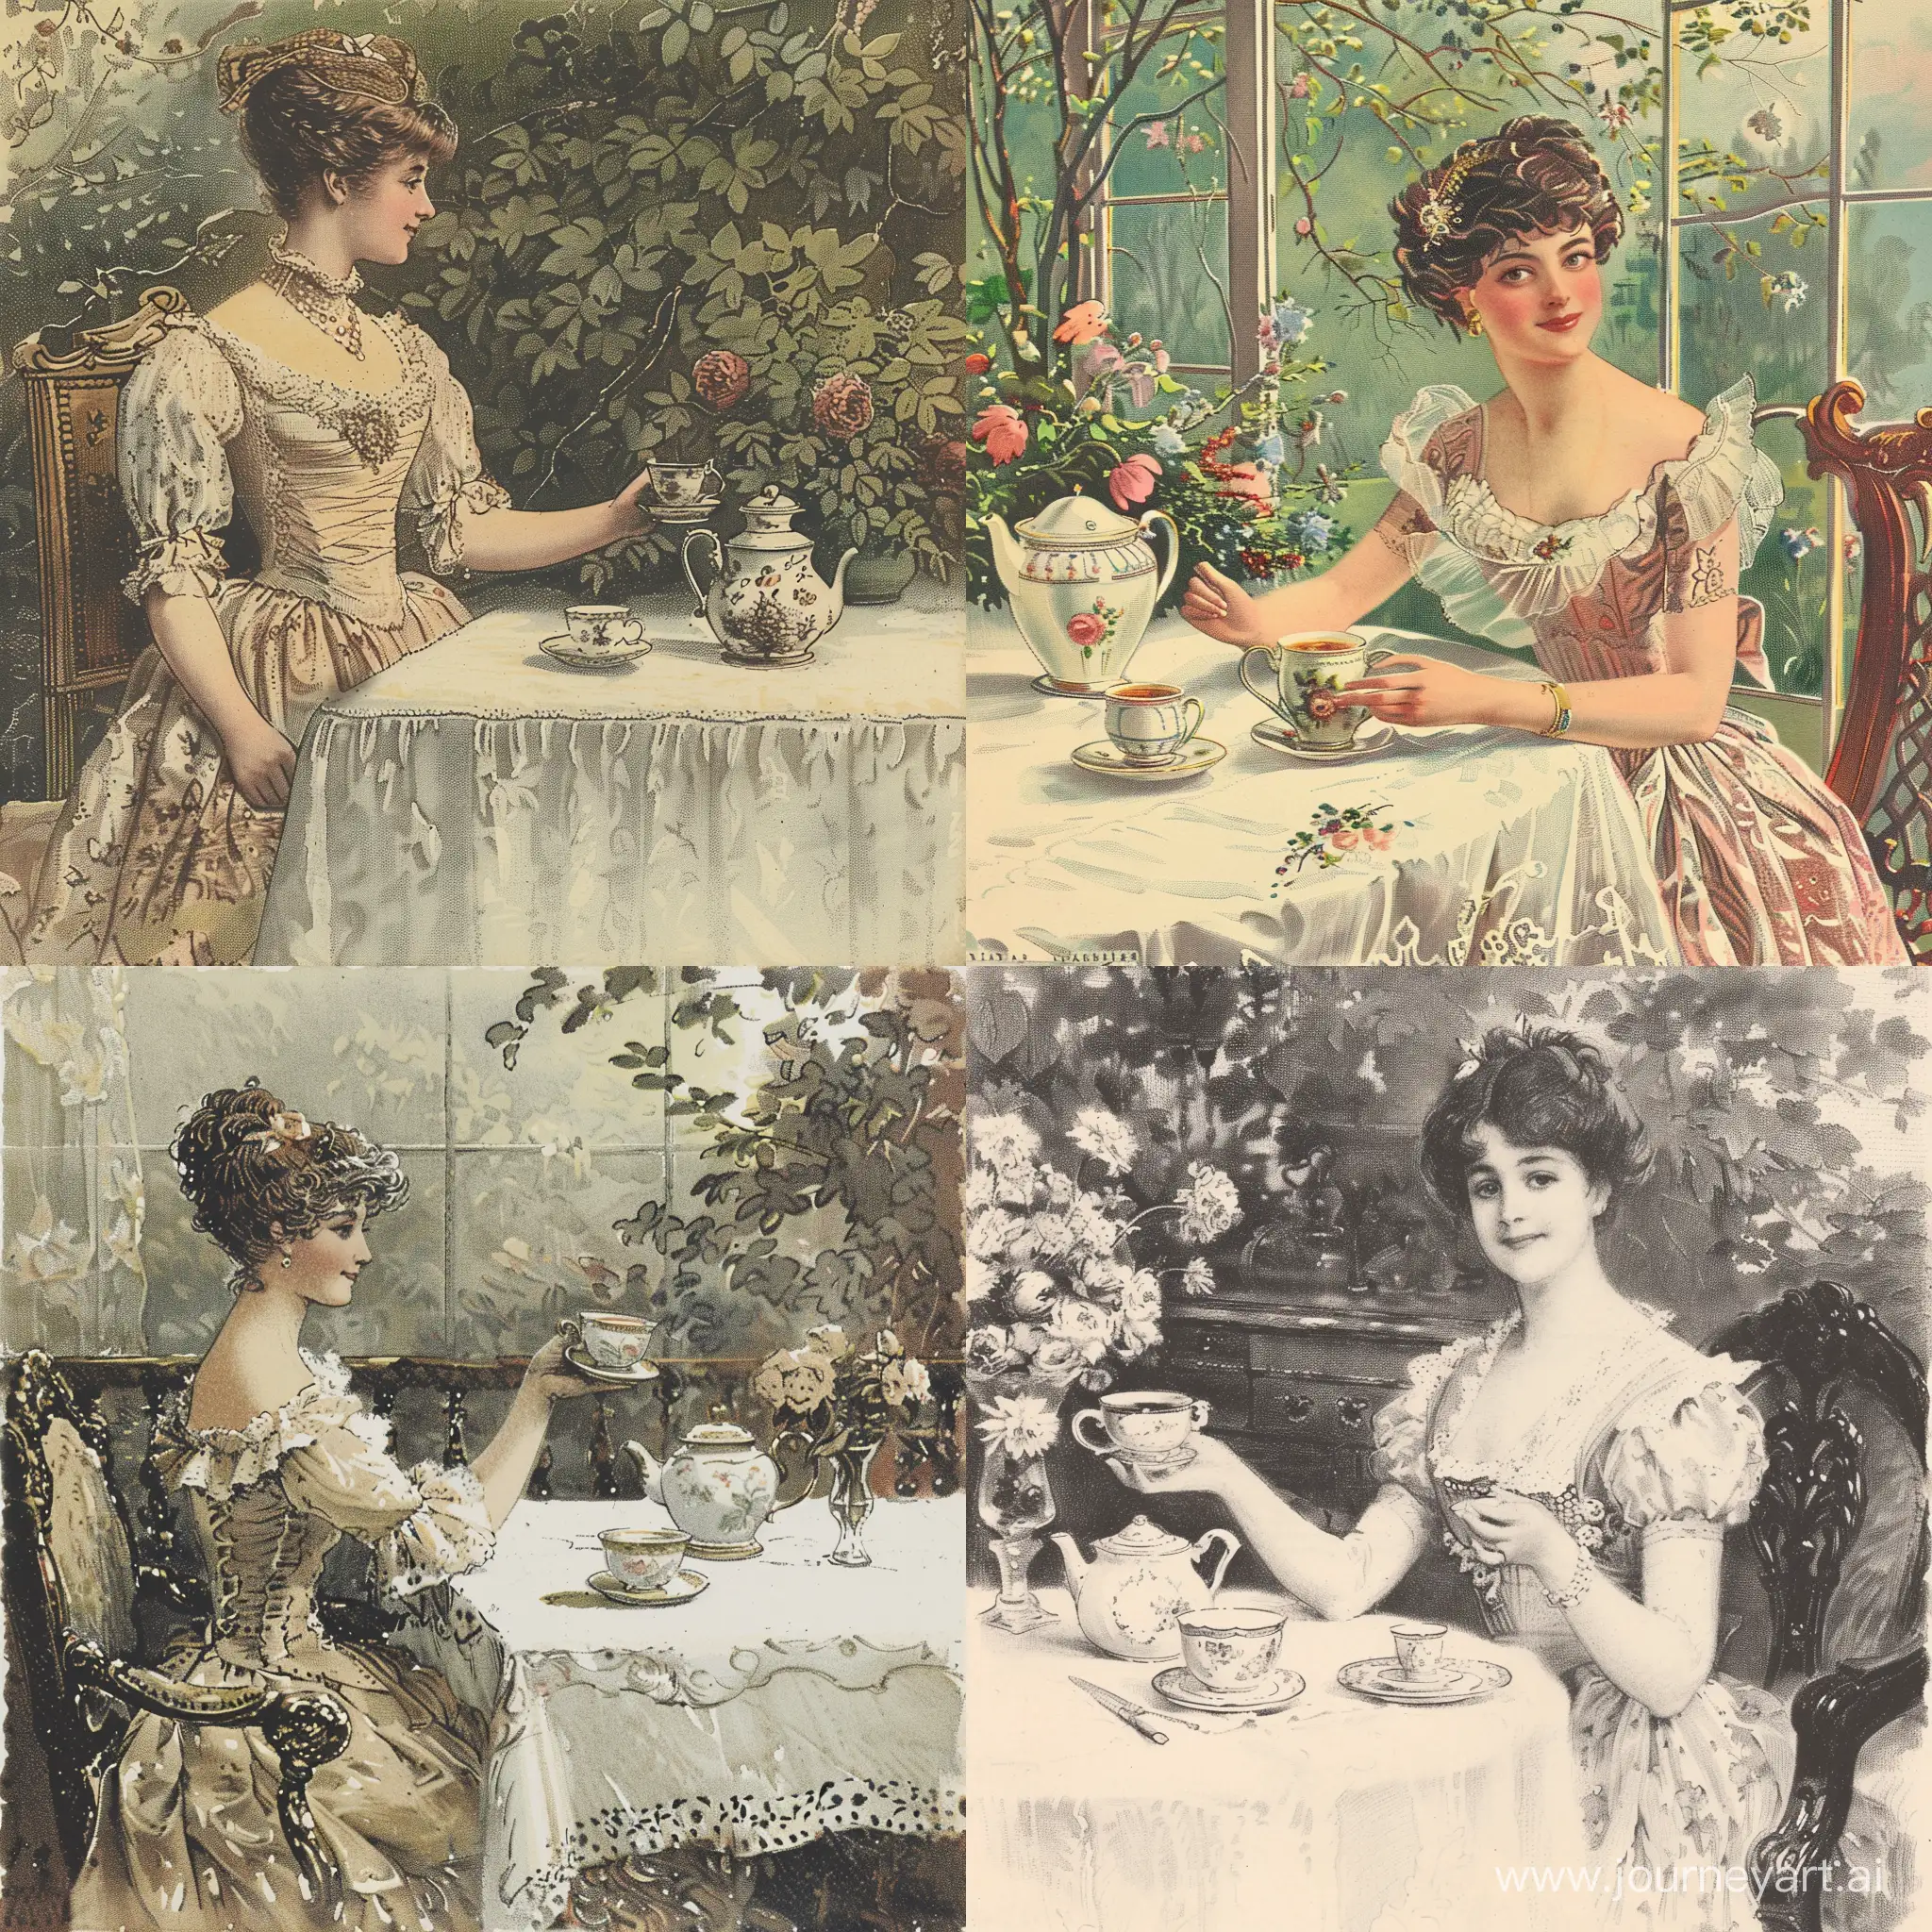 Draw art postcard  of the XIX century, at the table sits a woman in a dress and holds a cup of tea., On the table white tablecloth, porcelain teapot, flowers.